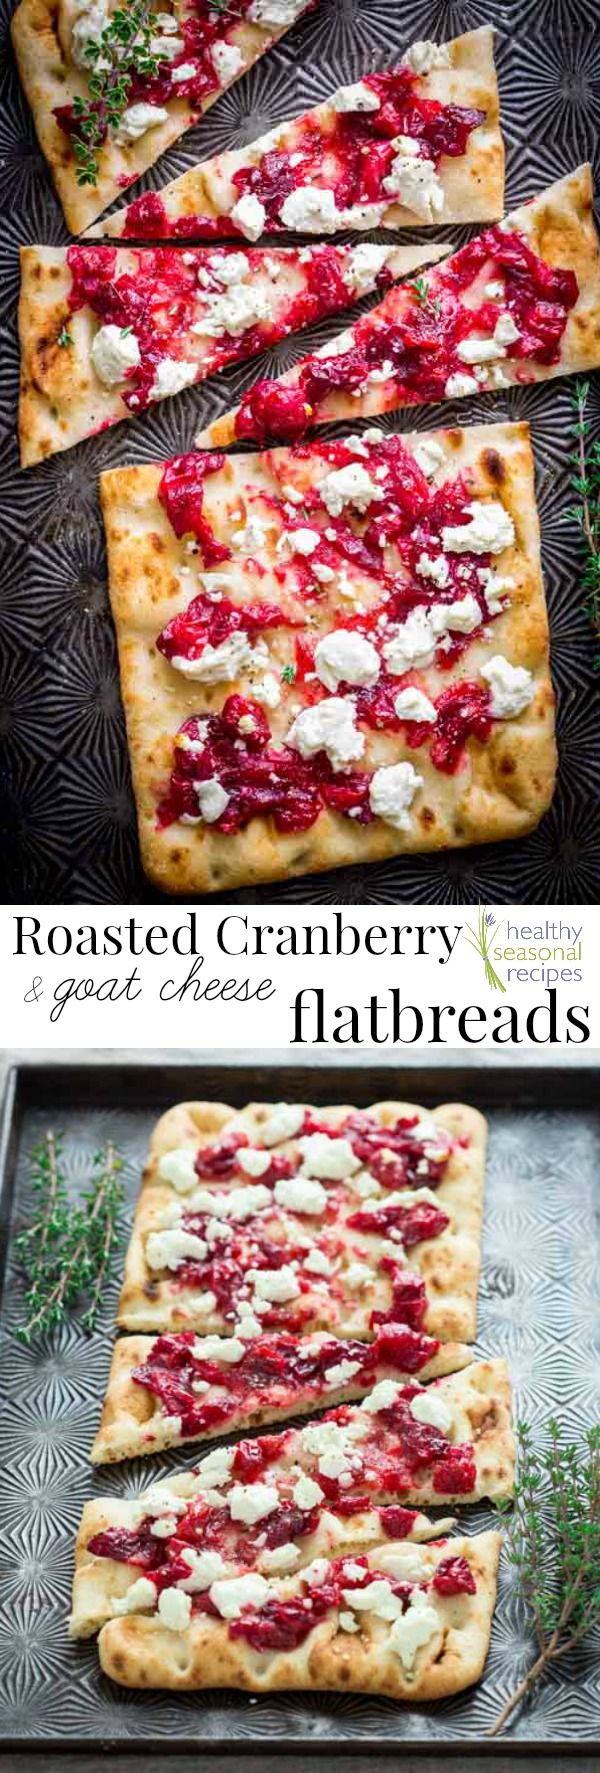 Roasted cranberry and goat cheese flatbreads